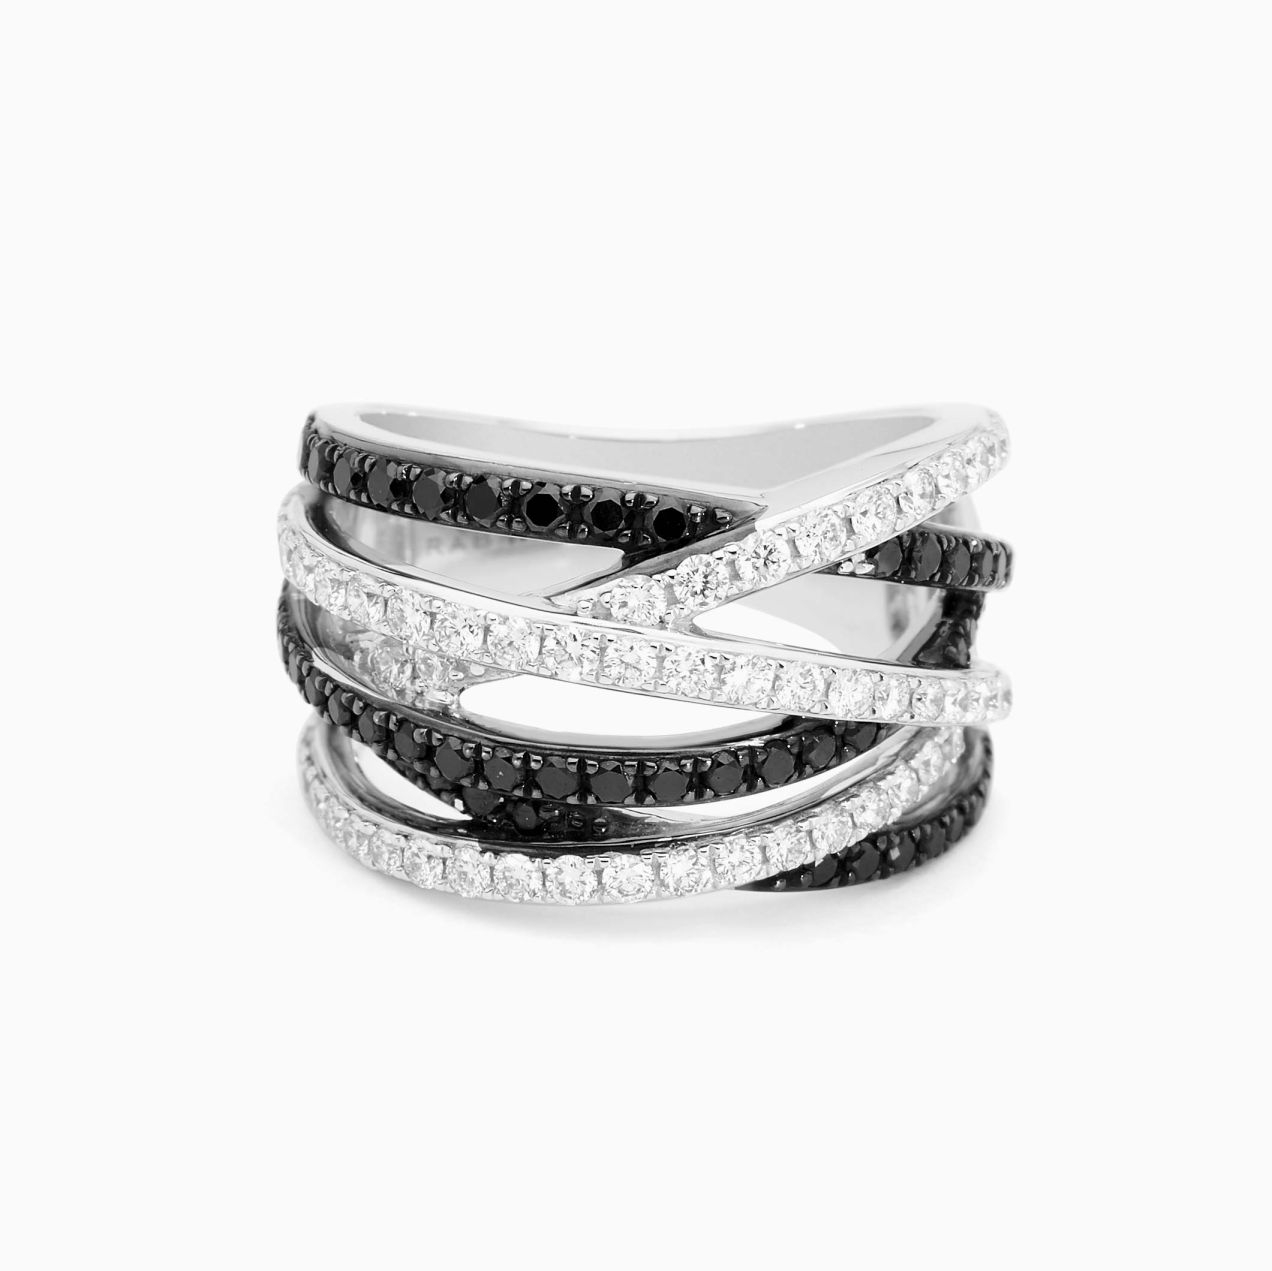 White gold ring with black diamonds